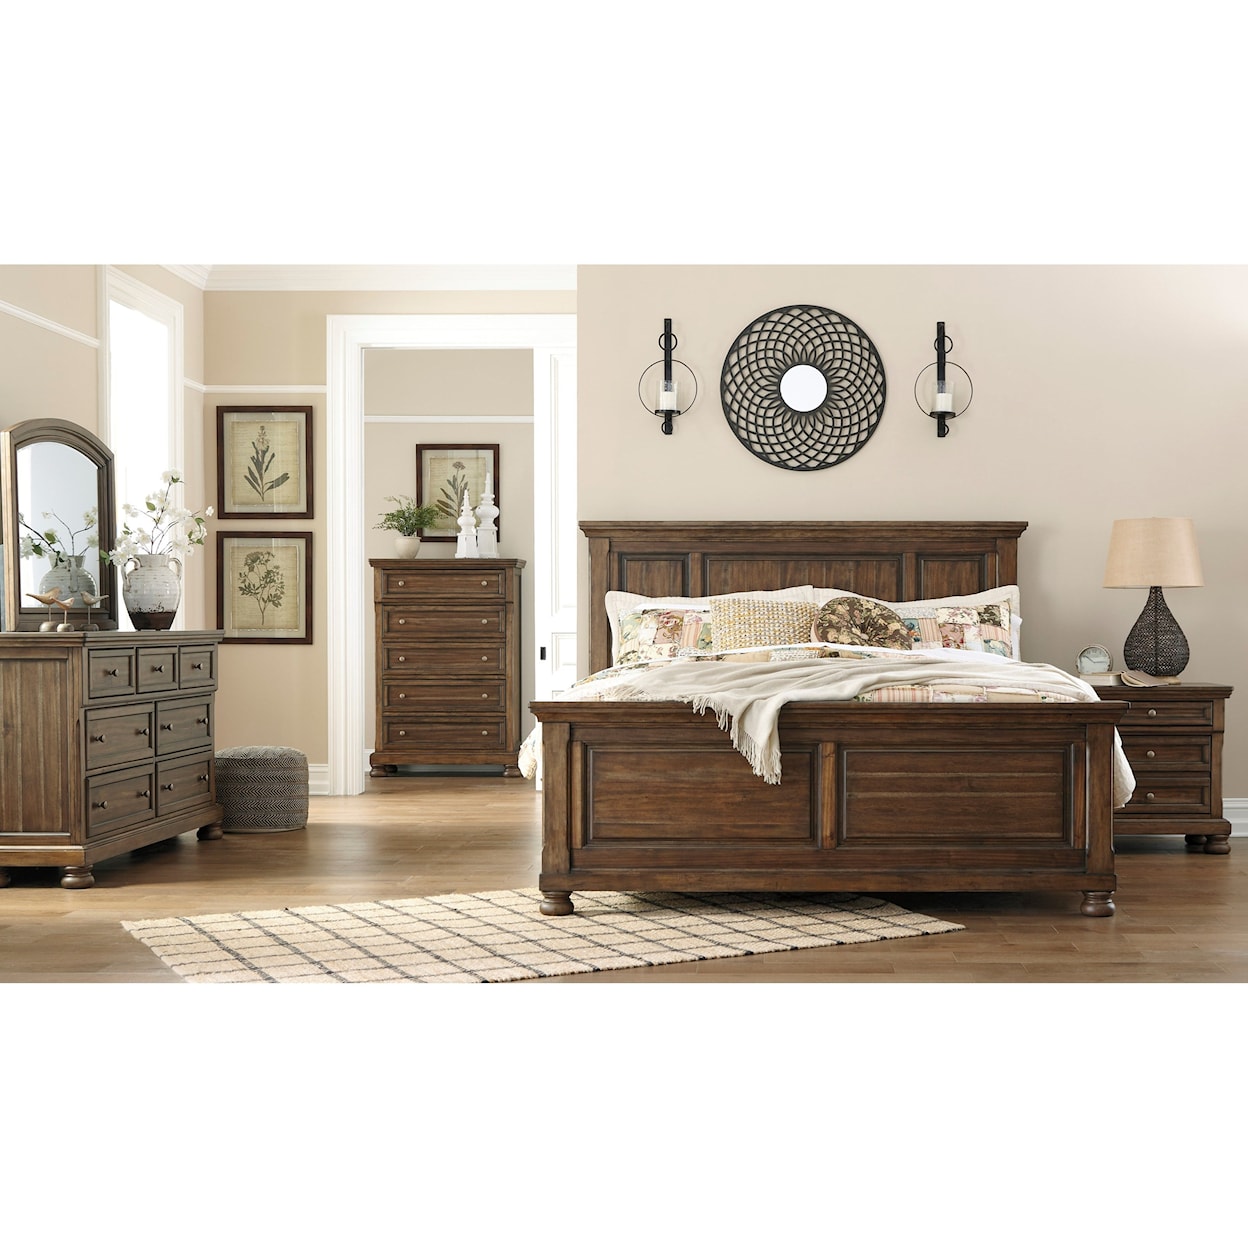 Signature Design by Ashley Flynnter King Bedroom Group